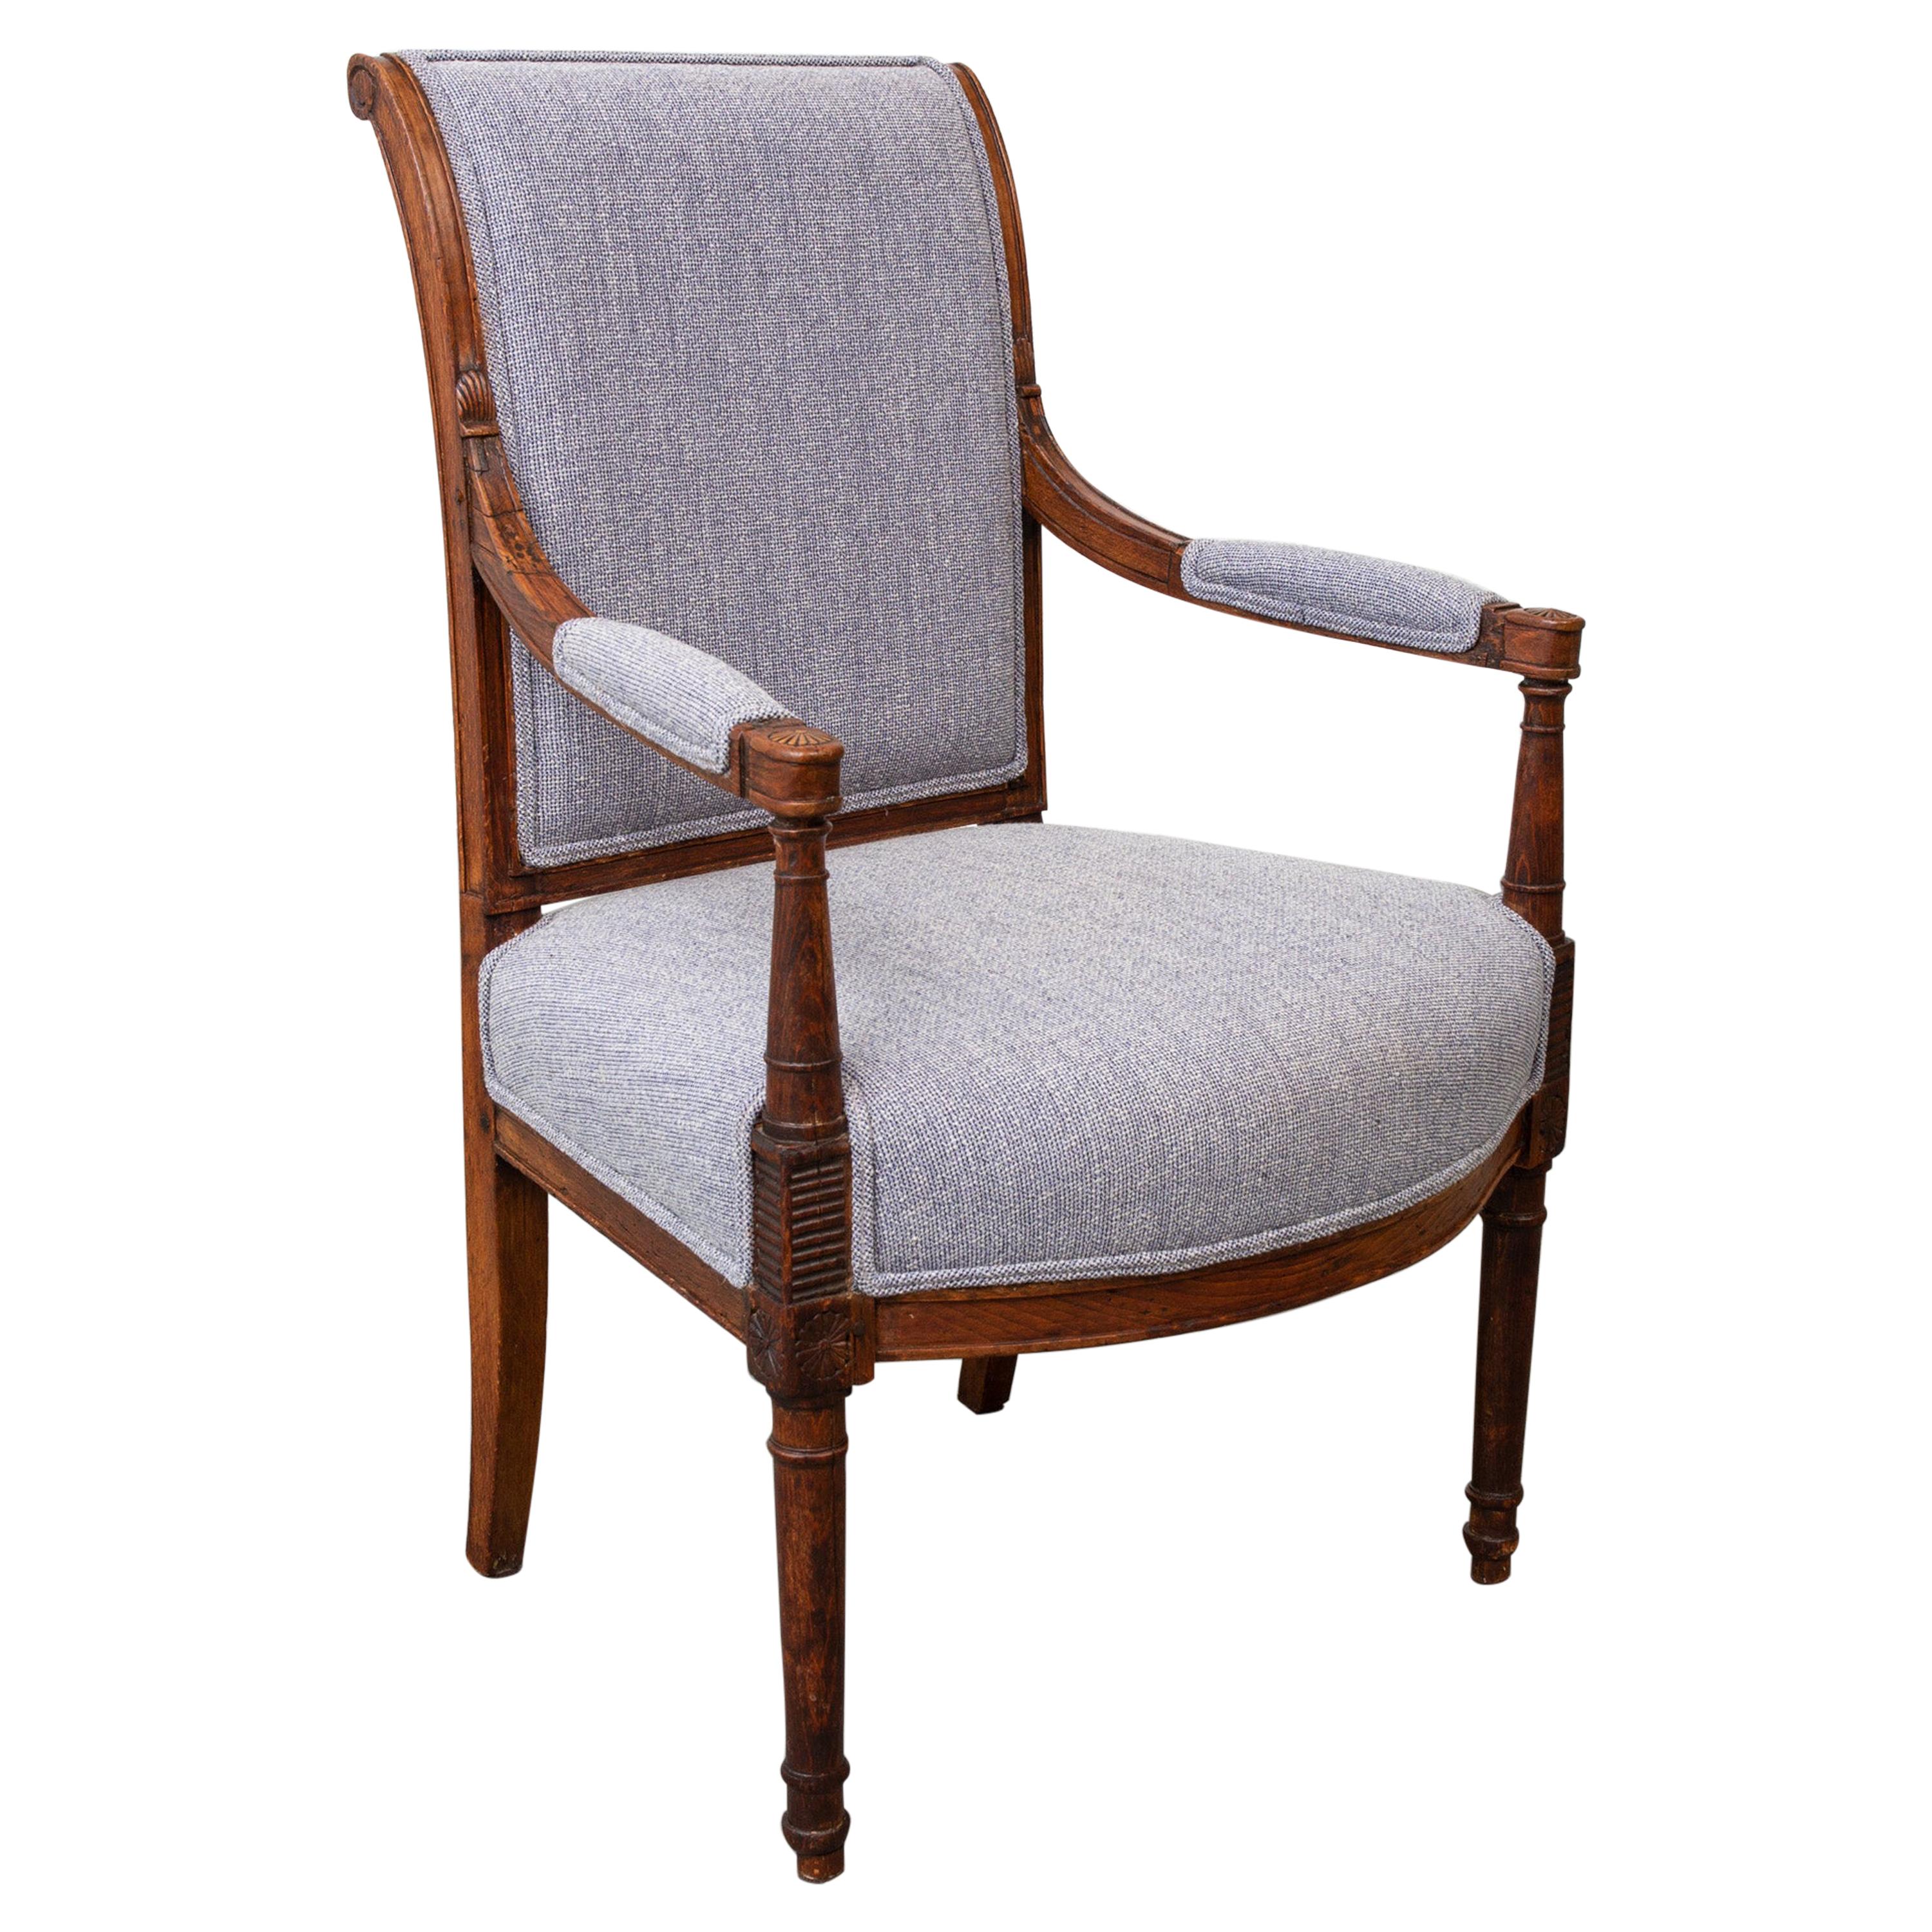 Late 19th Century Directoire Style Armchair For Sale